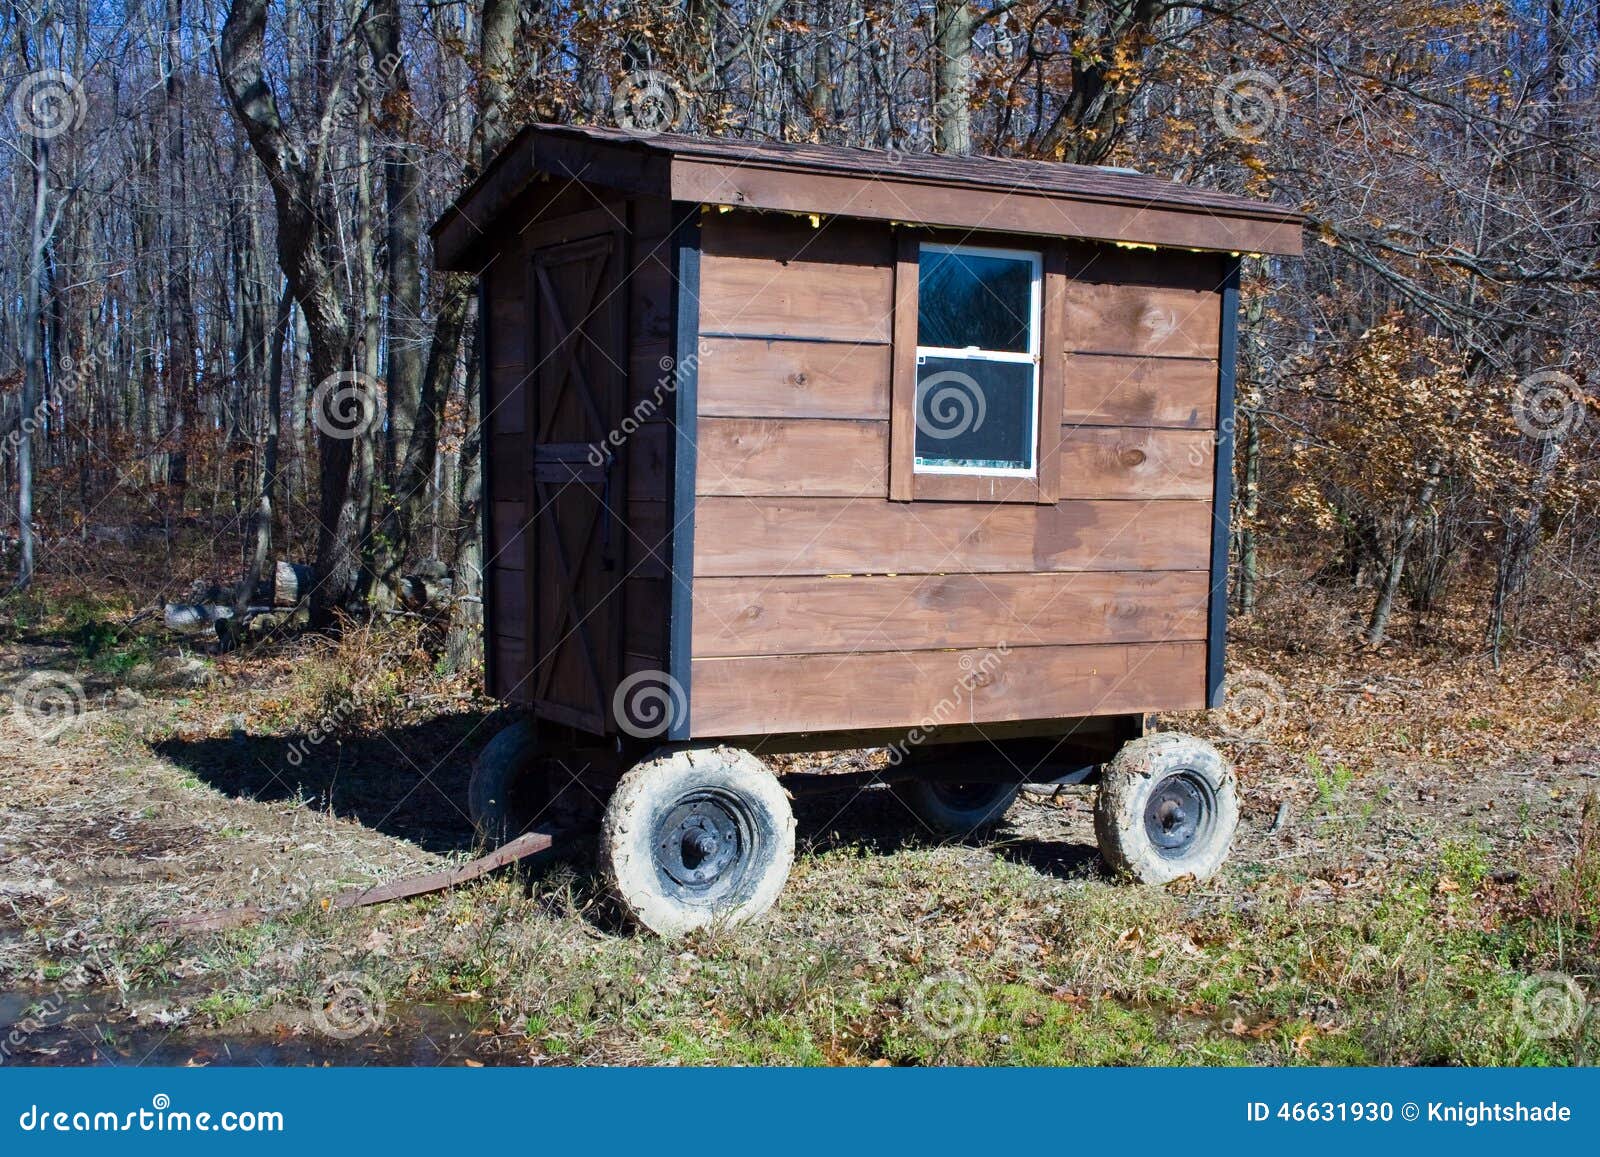 Small shed built on chassis with wheels for mobility.